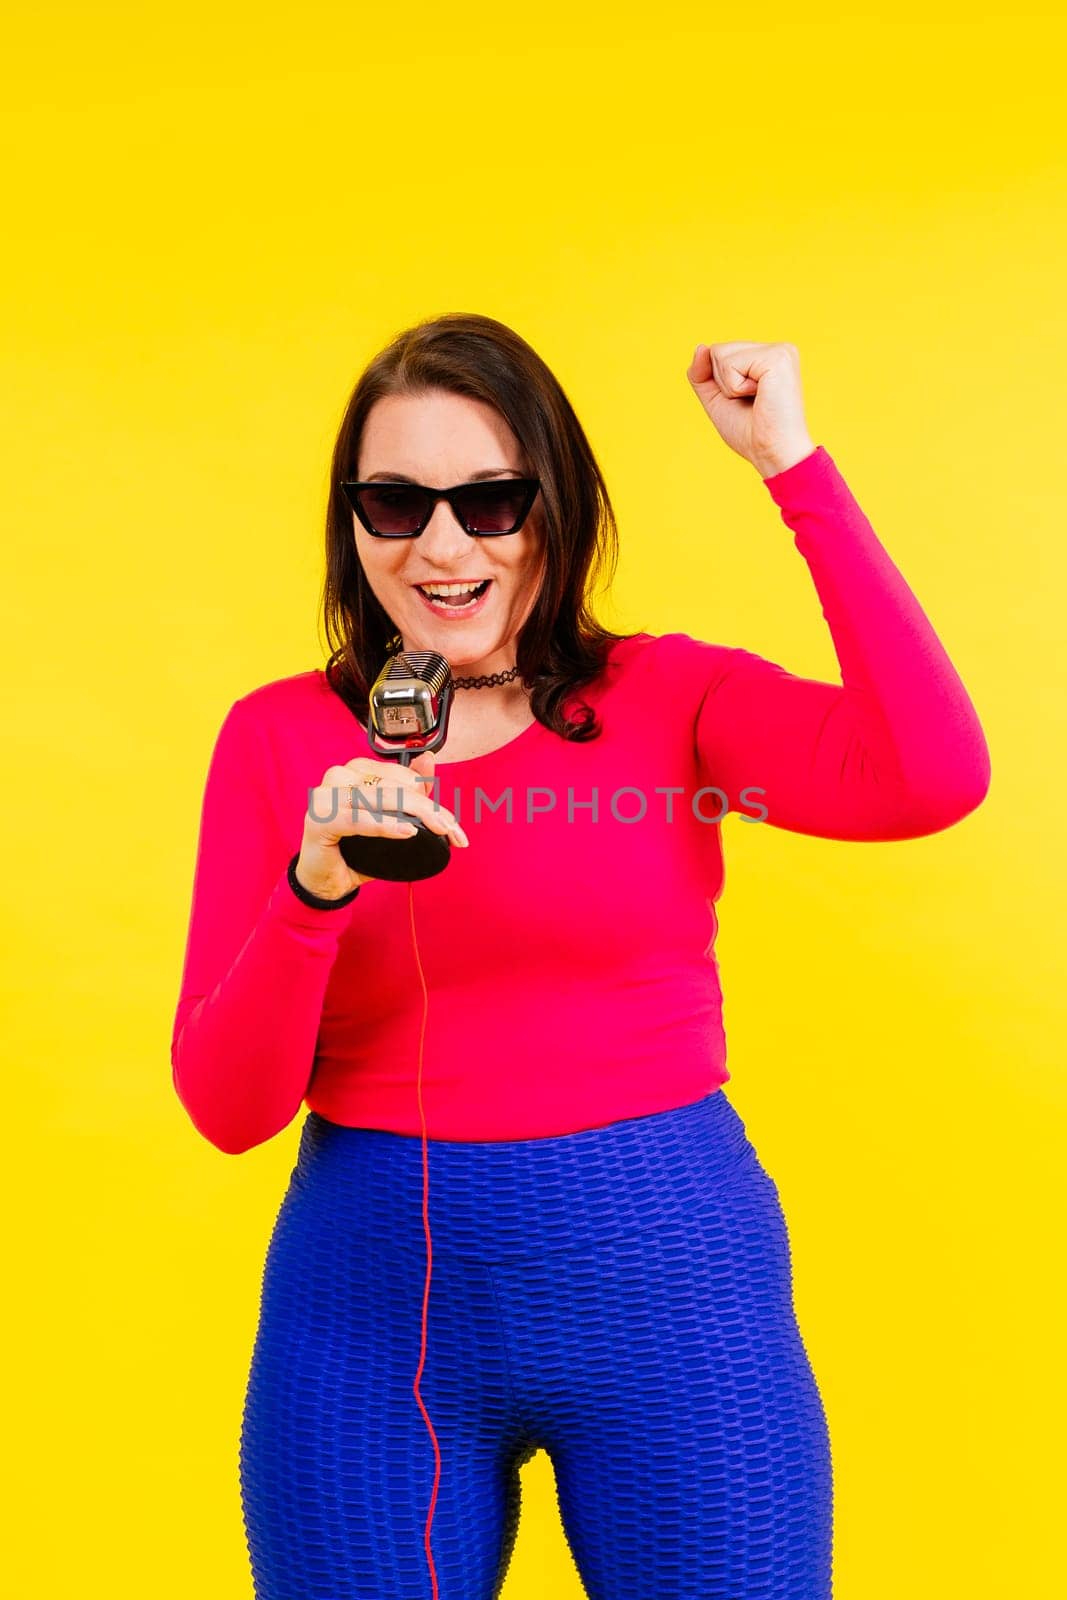 Woman in sport clothes sings into wired microphone and claps her hands on a yellow background